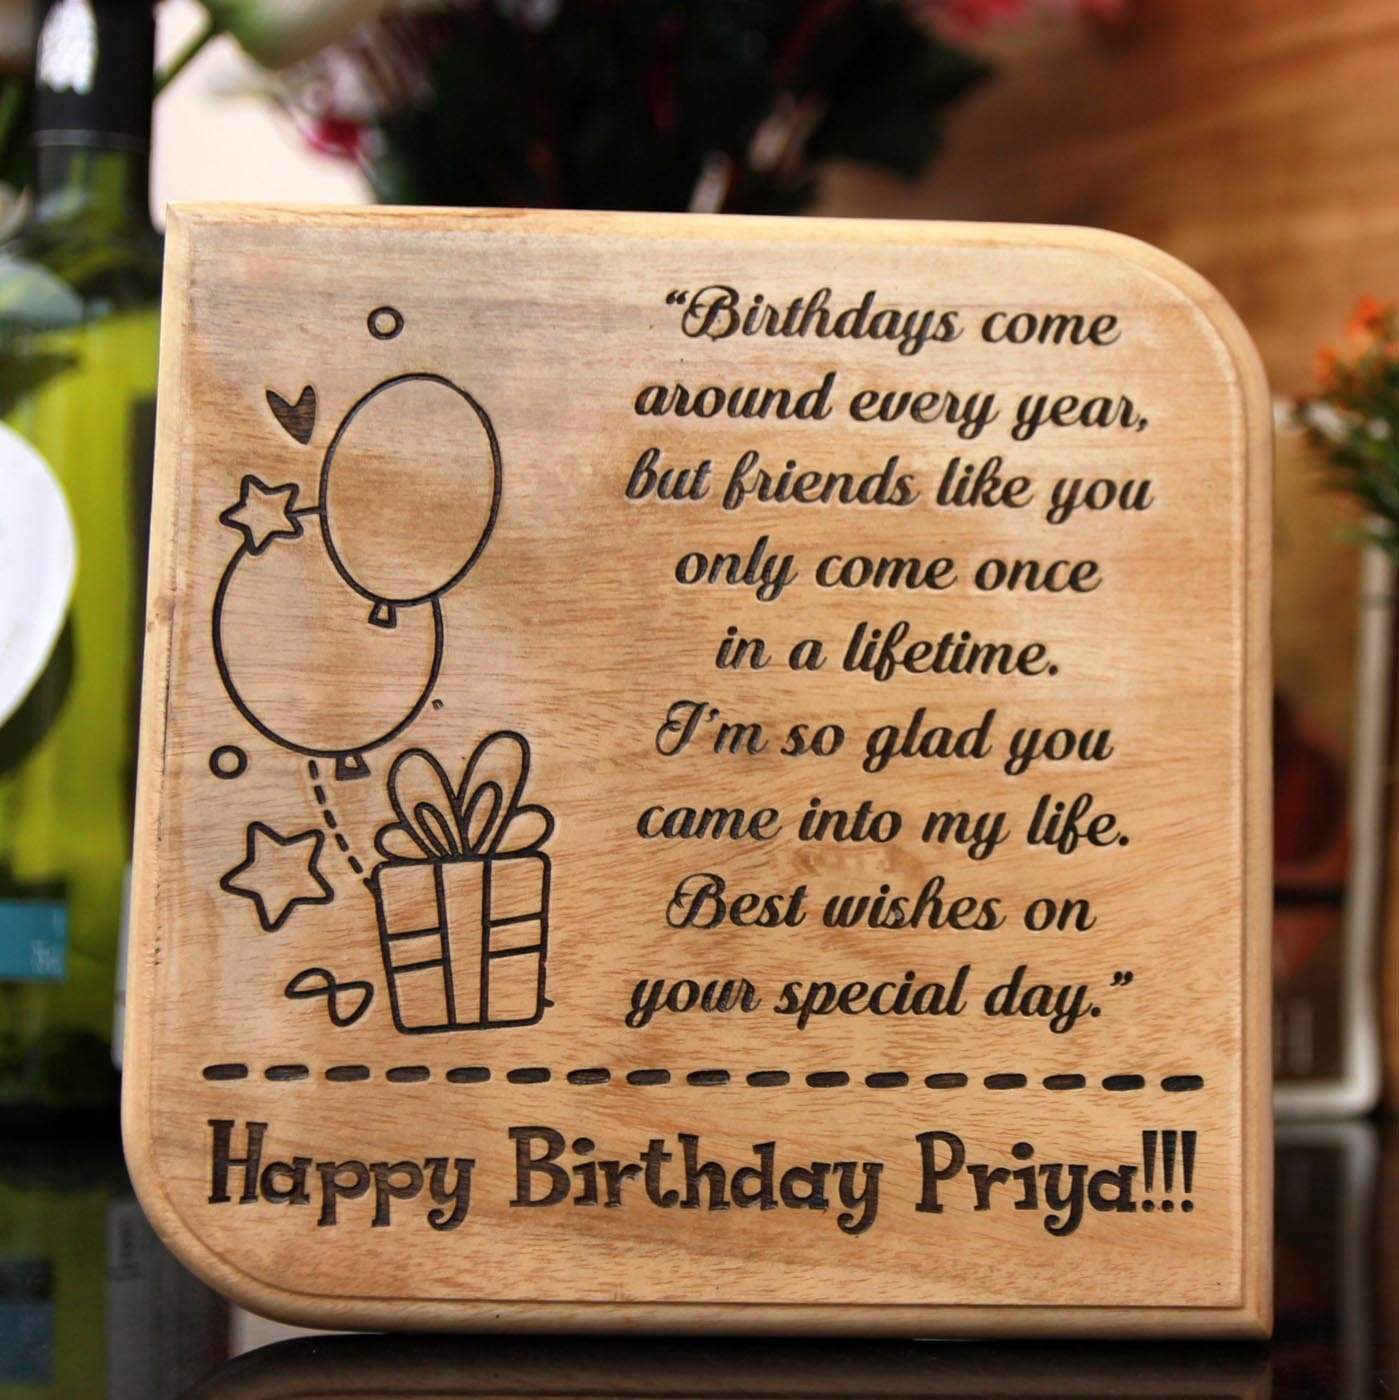 Birthdays come around every year, but friends like you only come once in a lifetime. I'm so glad you came into my life. Best wishes on your special day. Happy Birthday. This Wooden Plaque is one of the best birthday gifts for friends.